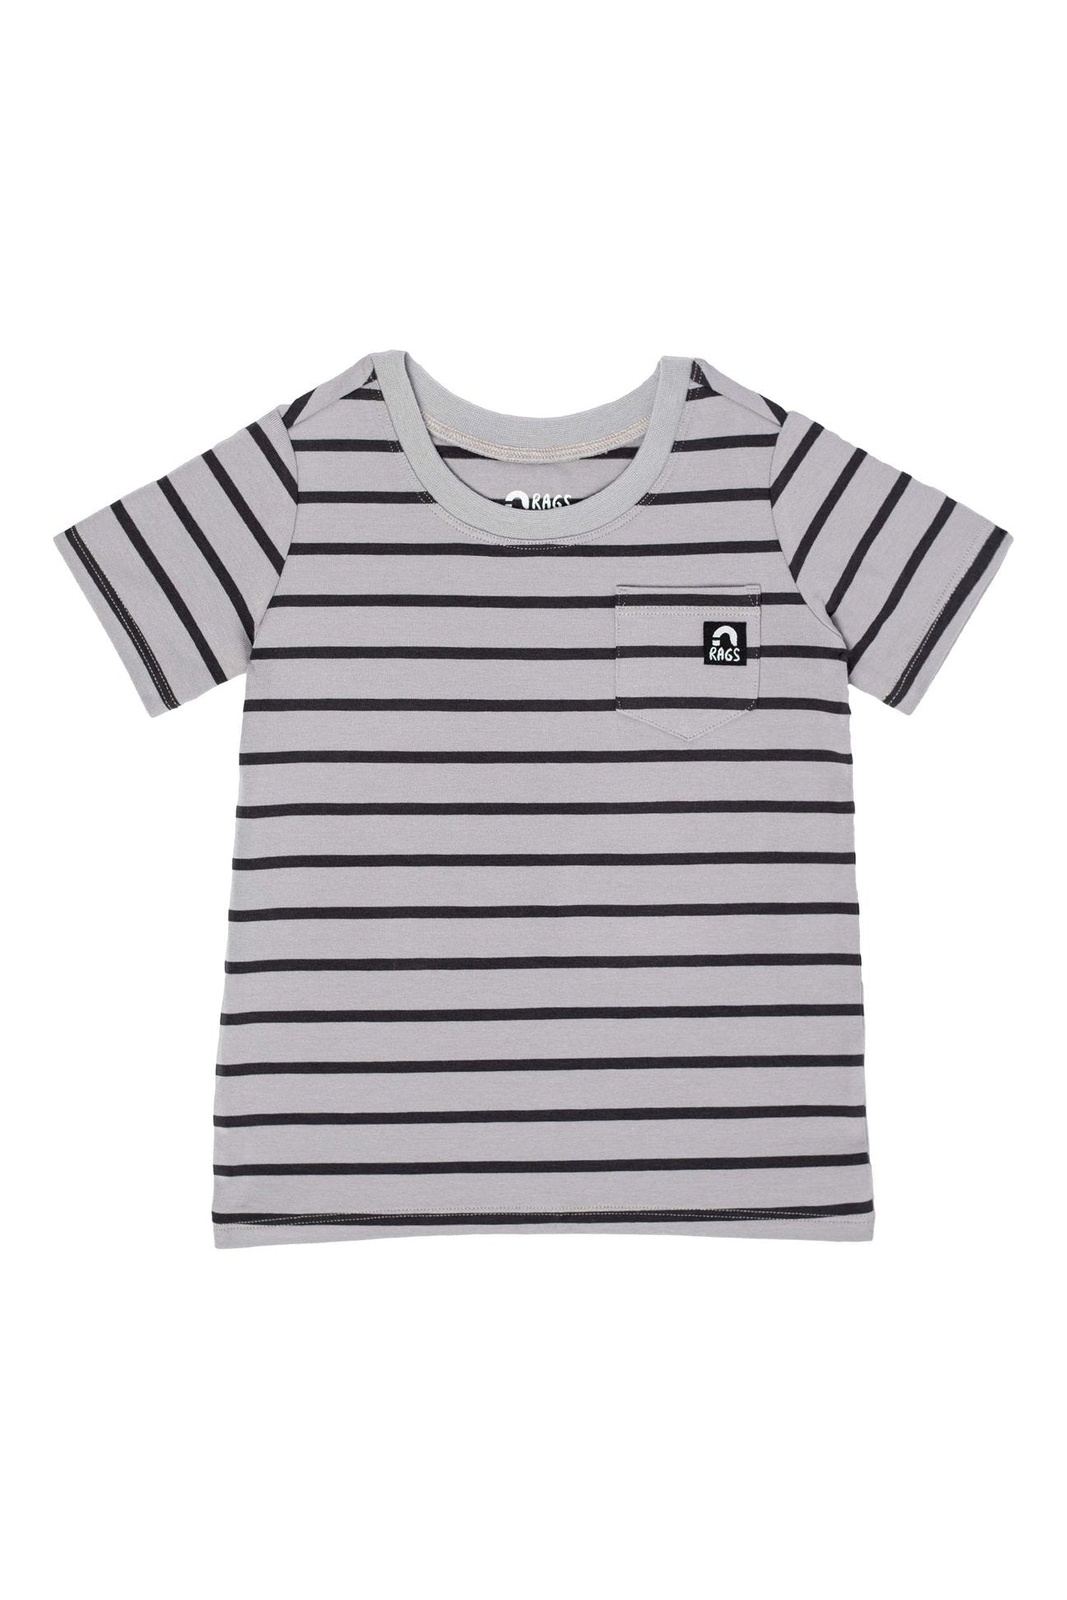 Essentials Short Sleeve Chest Pocket Rounded Tee - 'Quarry Stripe' - Tea for Three: A Children's Boutique-New Arrivals-TheT43Shop